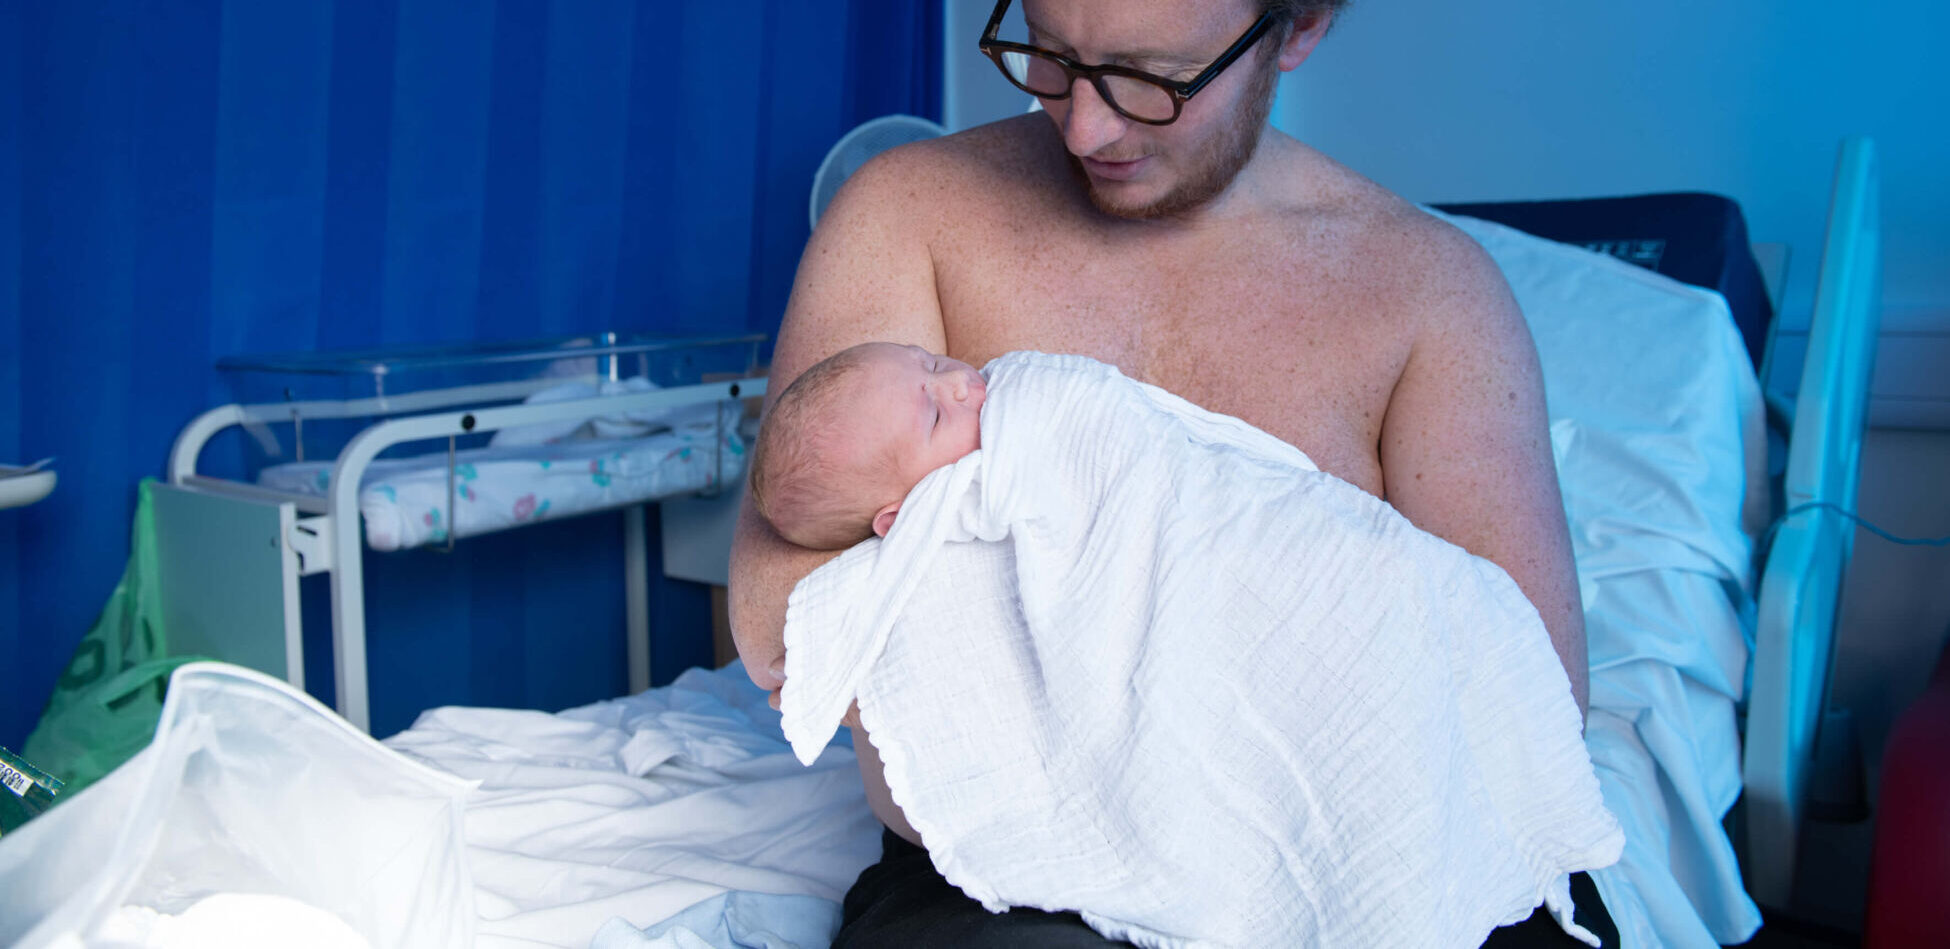 How to Maximize Skin to Skin Contact with Baby (Kangaroo Care)